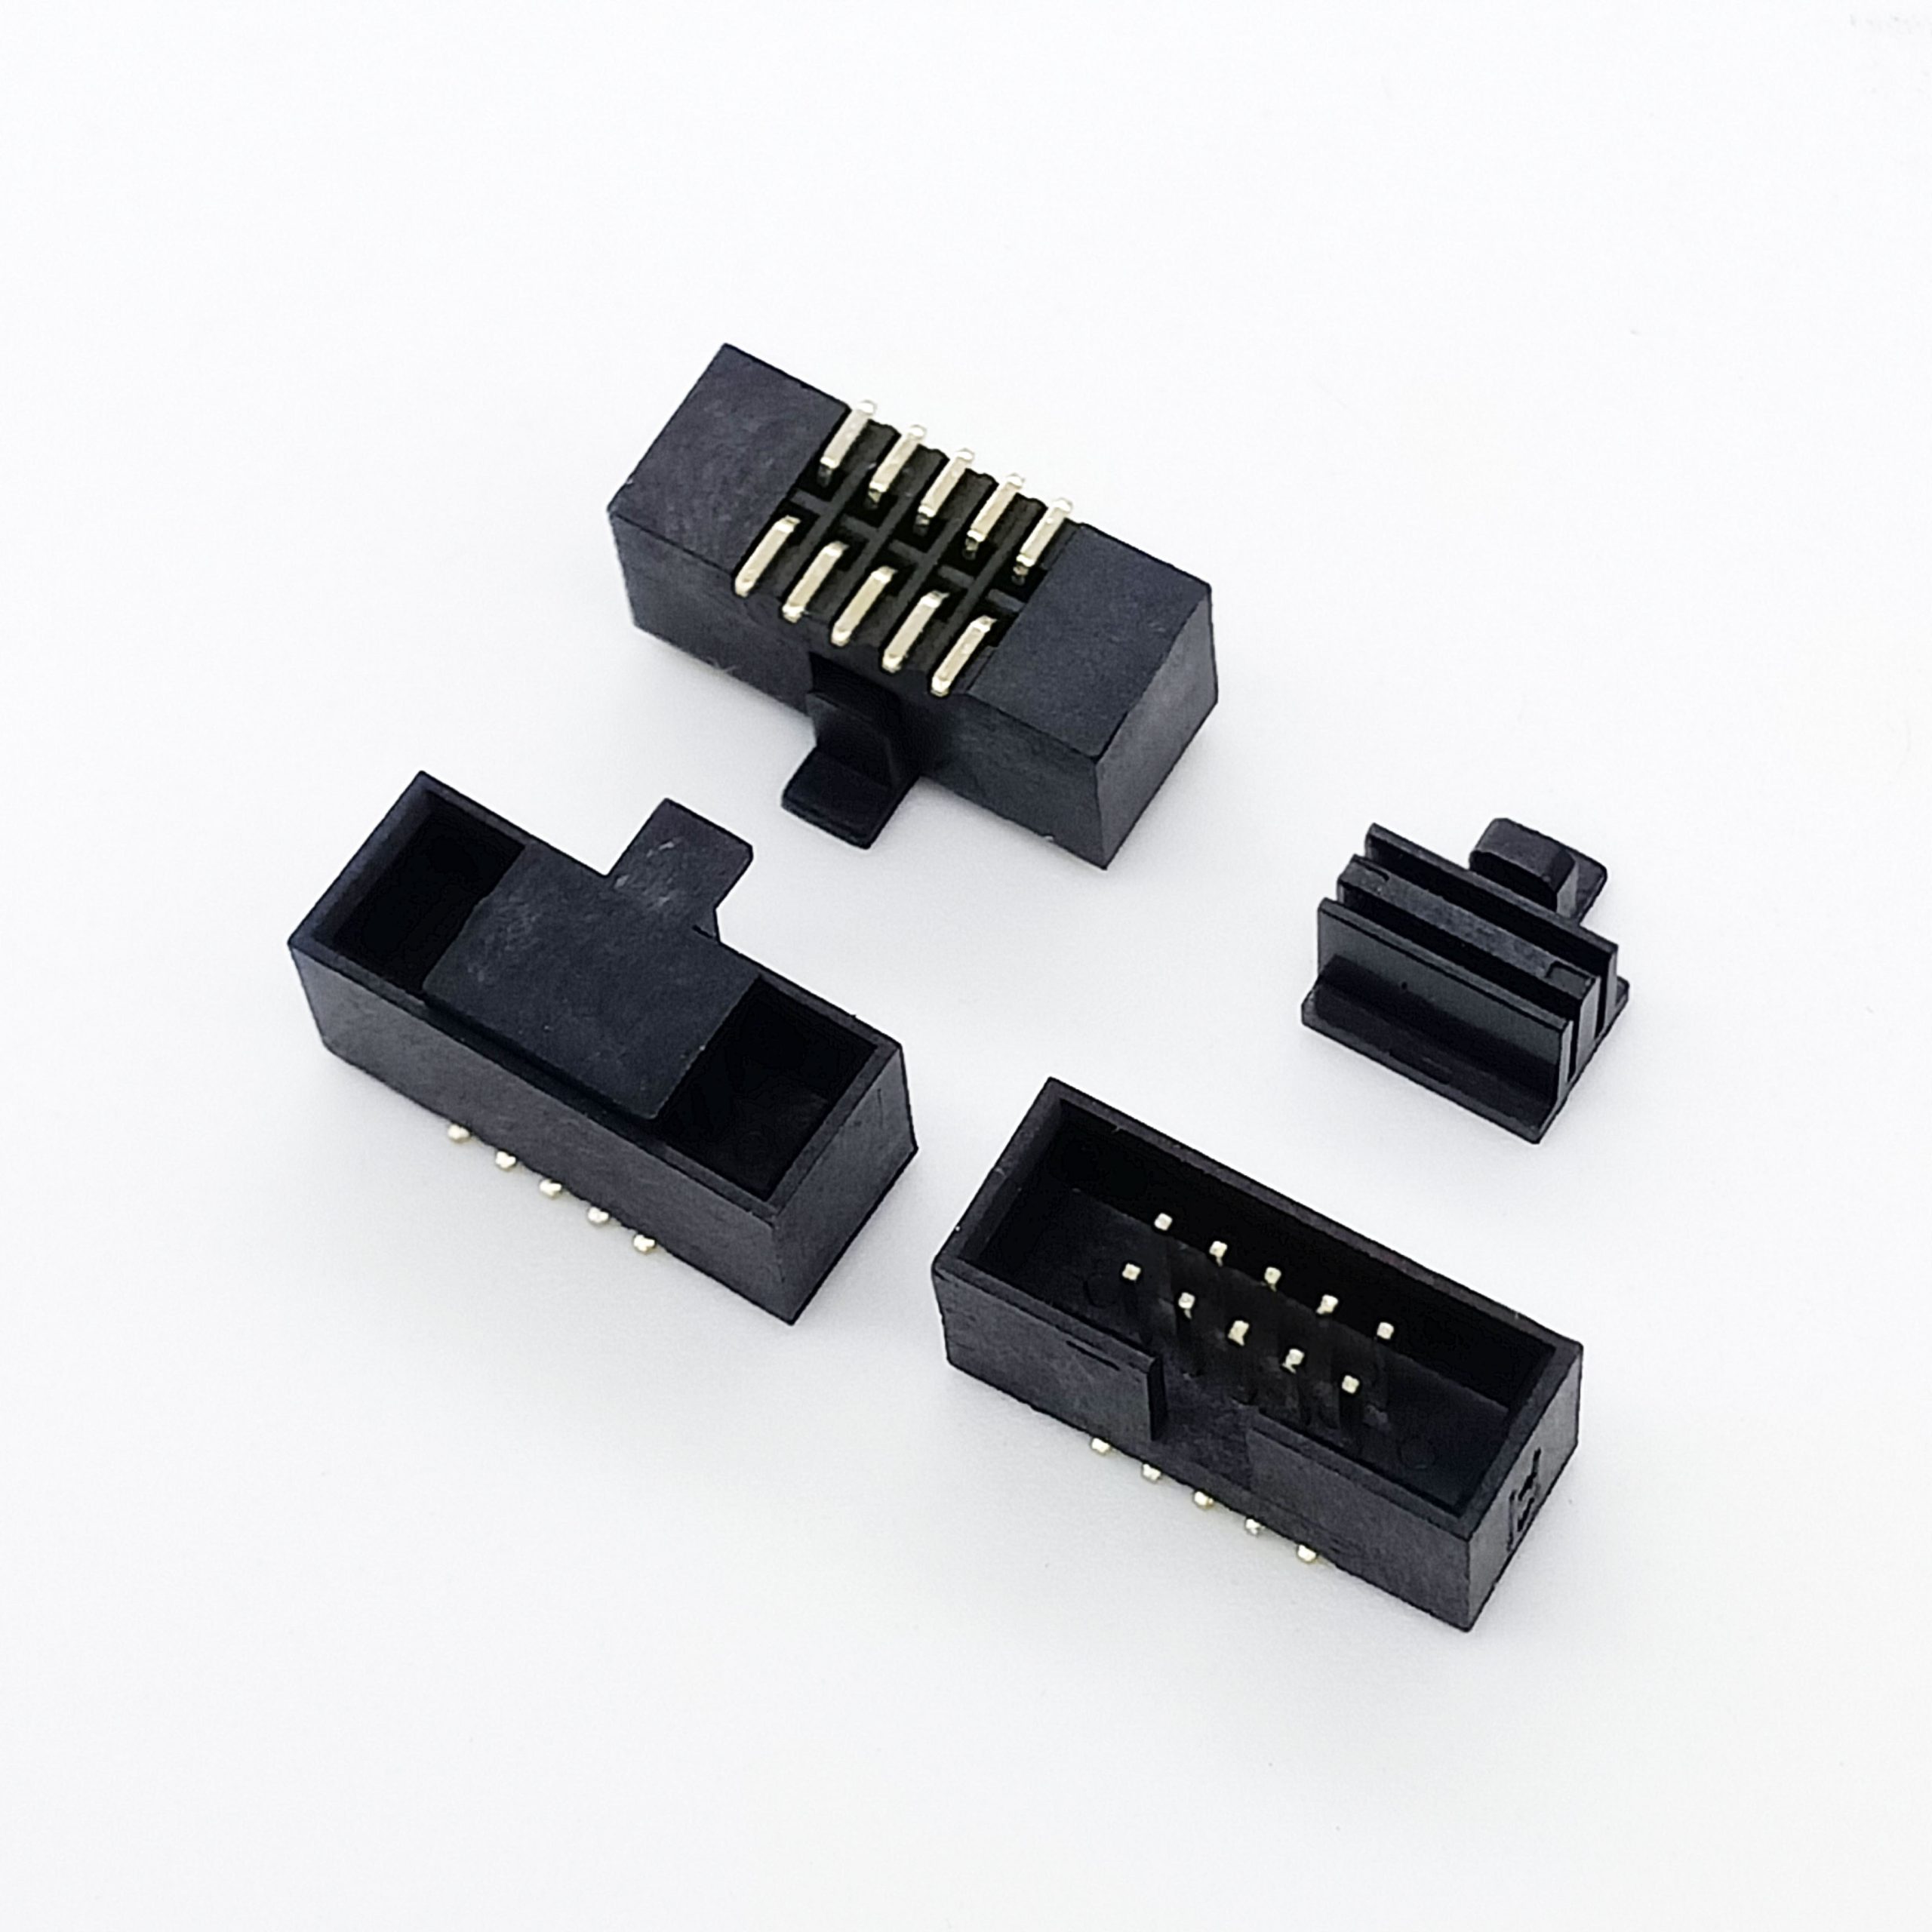 The 10-pin box header is a versatile electrical connector with ten precisely aligned pins. It provides a secure and reliable connection for various electronic devices, making it essential for applications in electronics, robotics, and automation systems. 